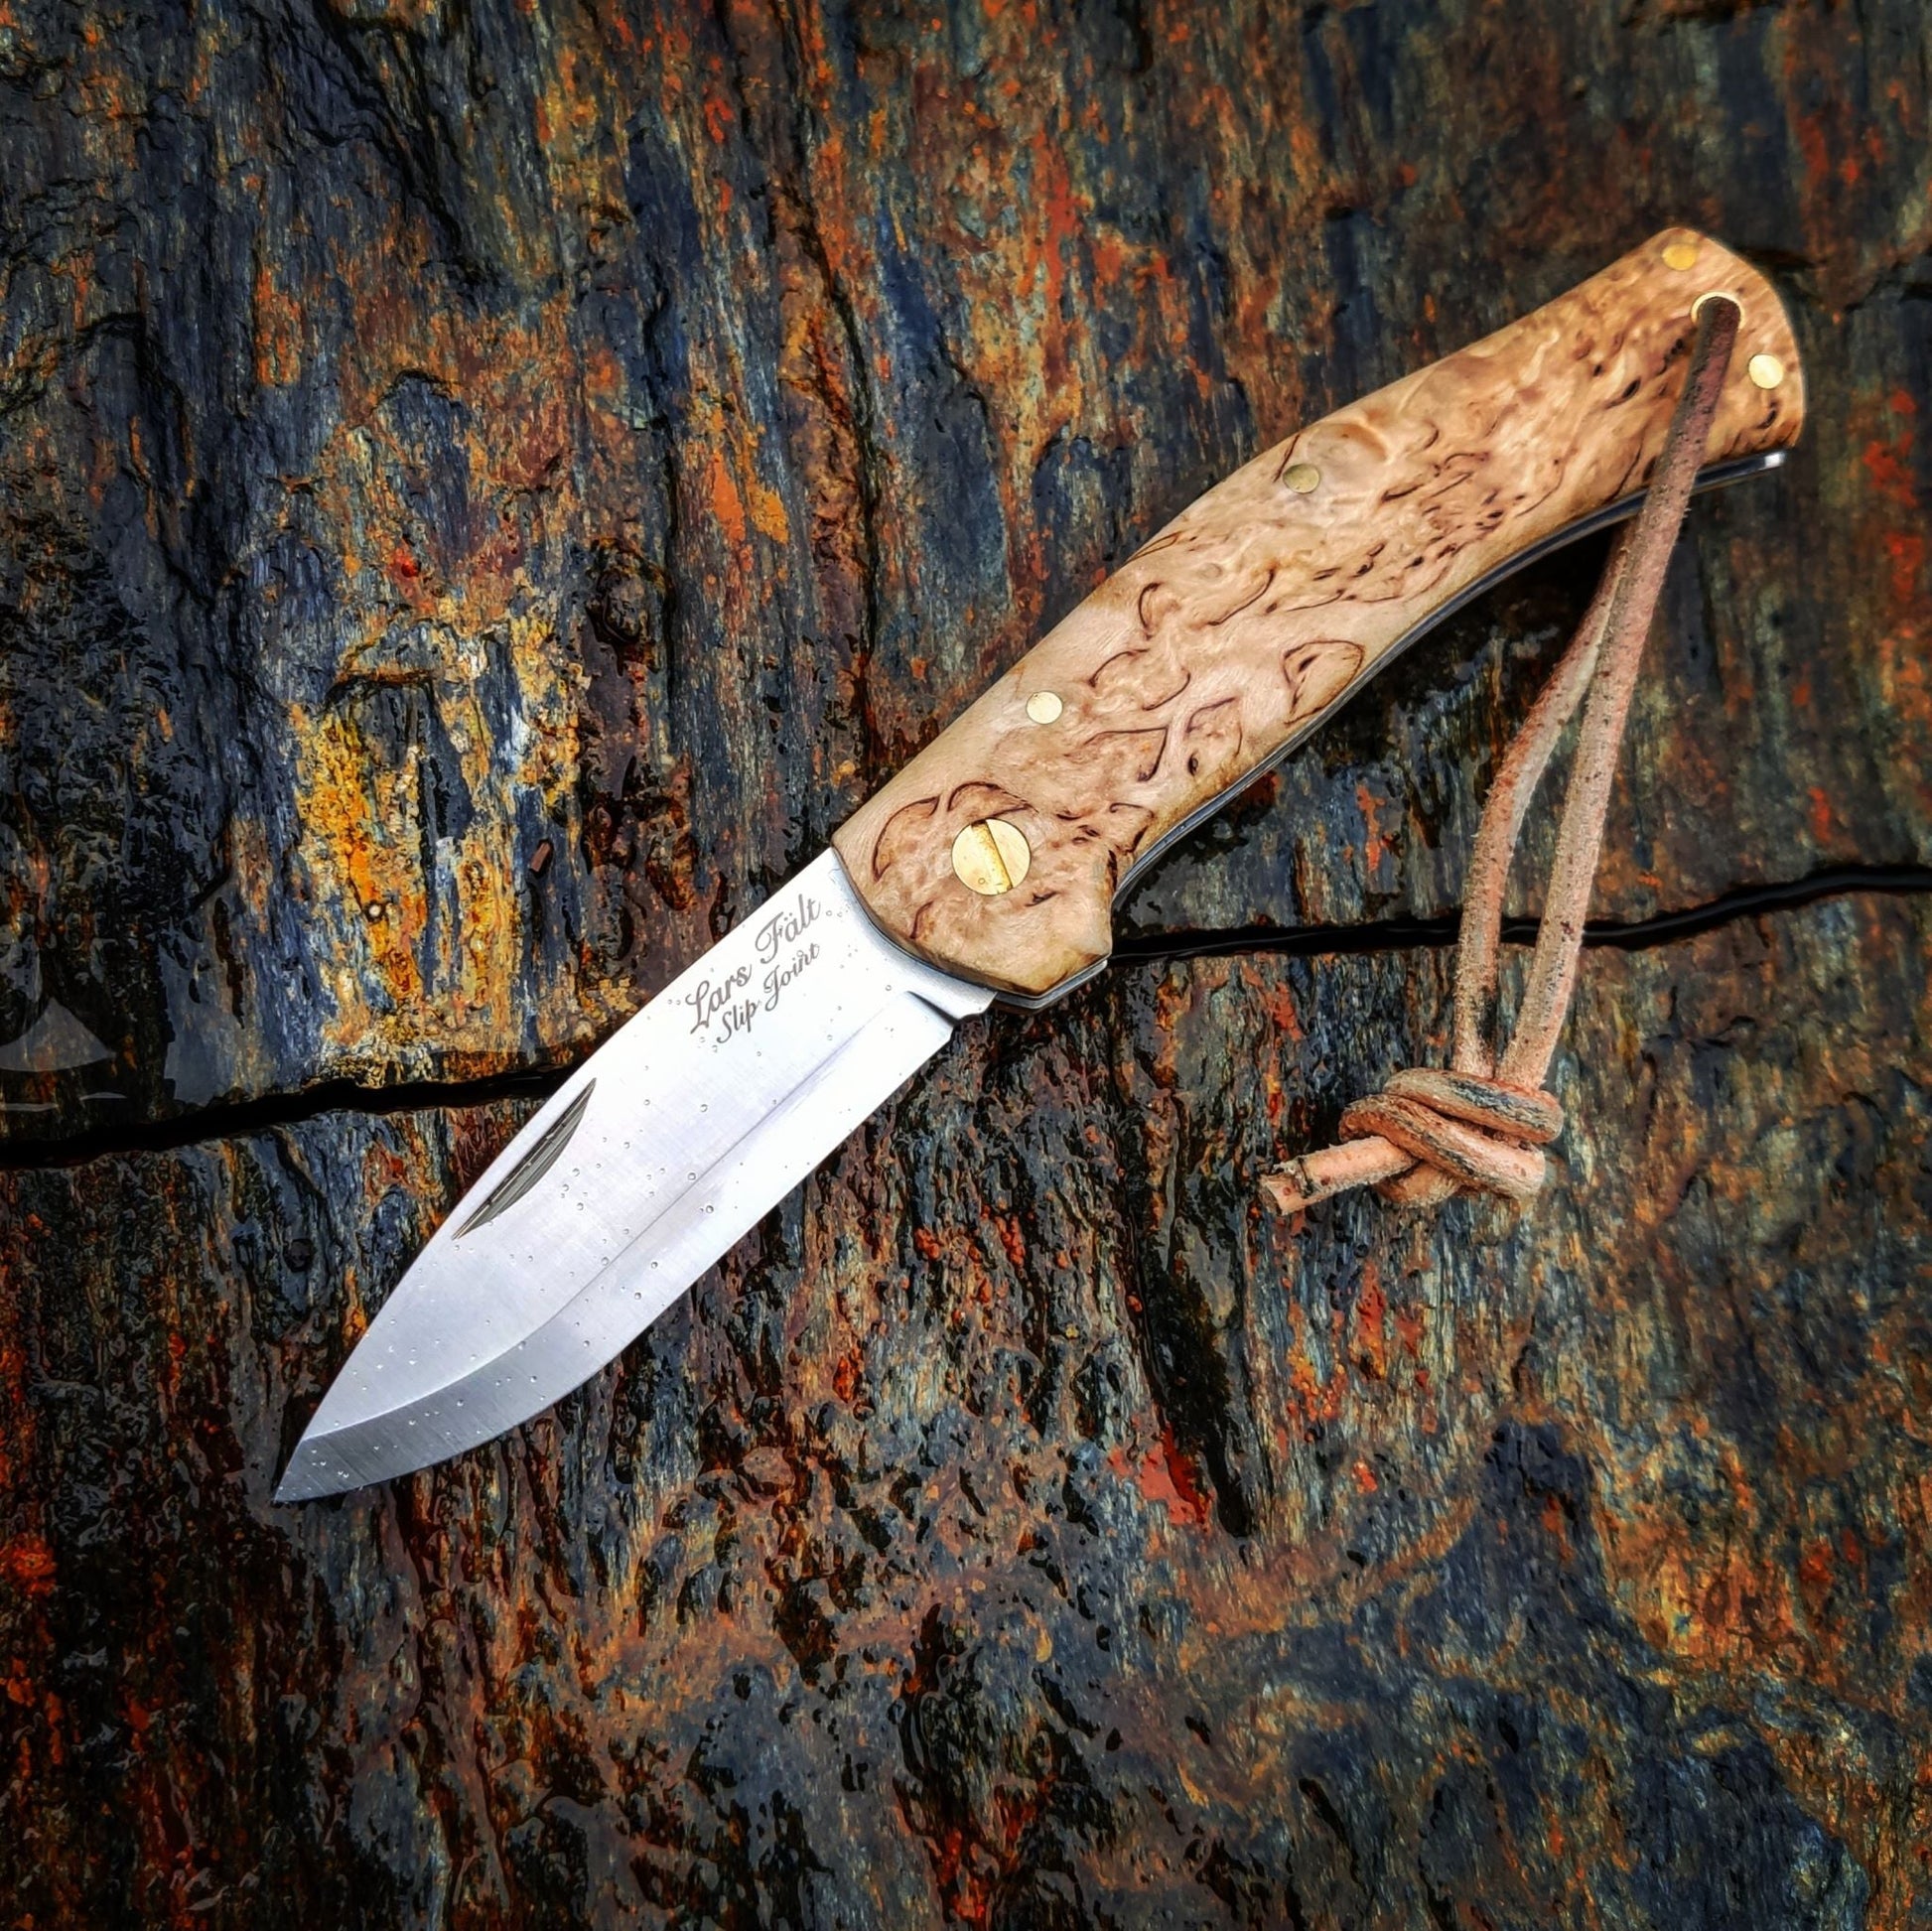 UK-legal folding knife, stainless steel blade, curly birch handle,, made by Casstrom Sweden. 